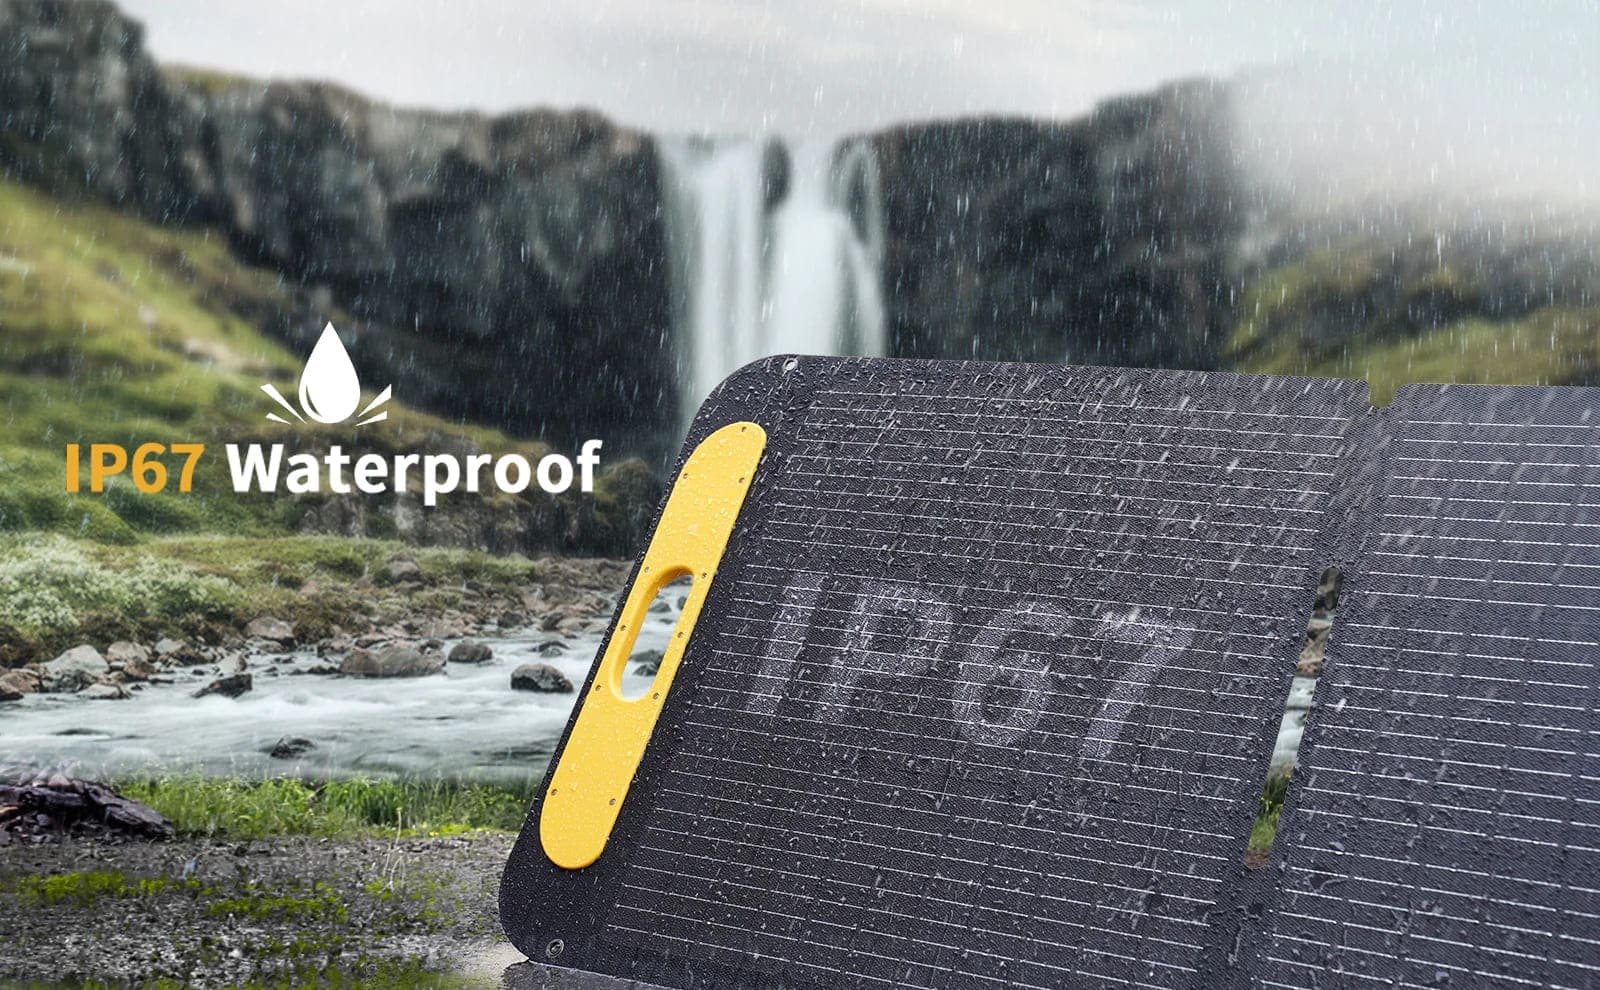 VTOMAN VS220 solar panel features IP67 water-resistant rating that protects the panel from water splashing